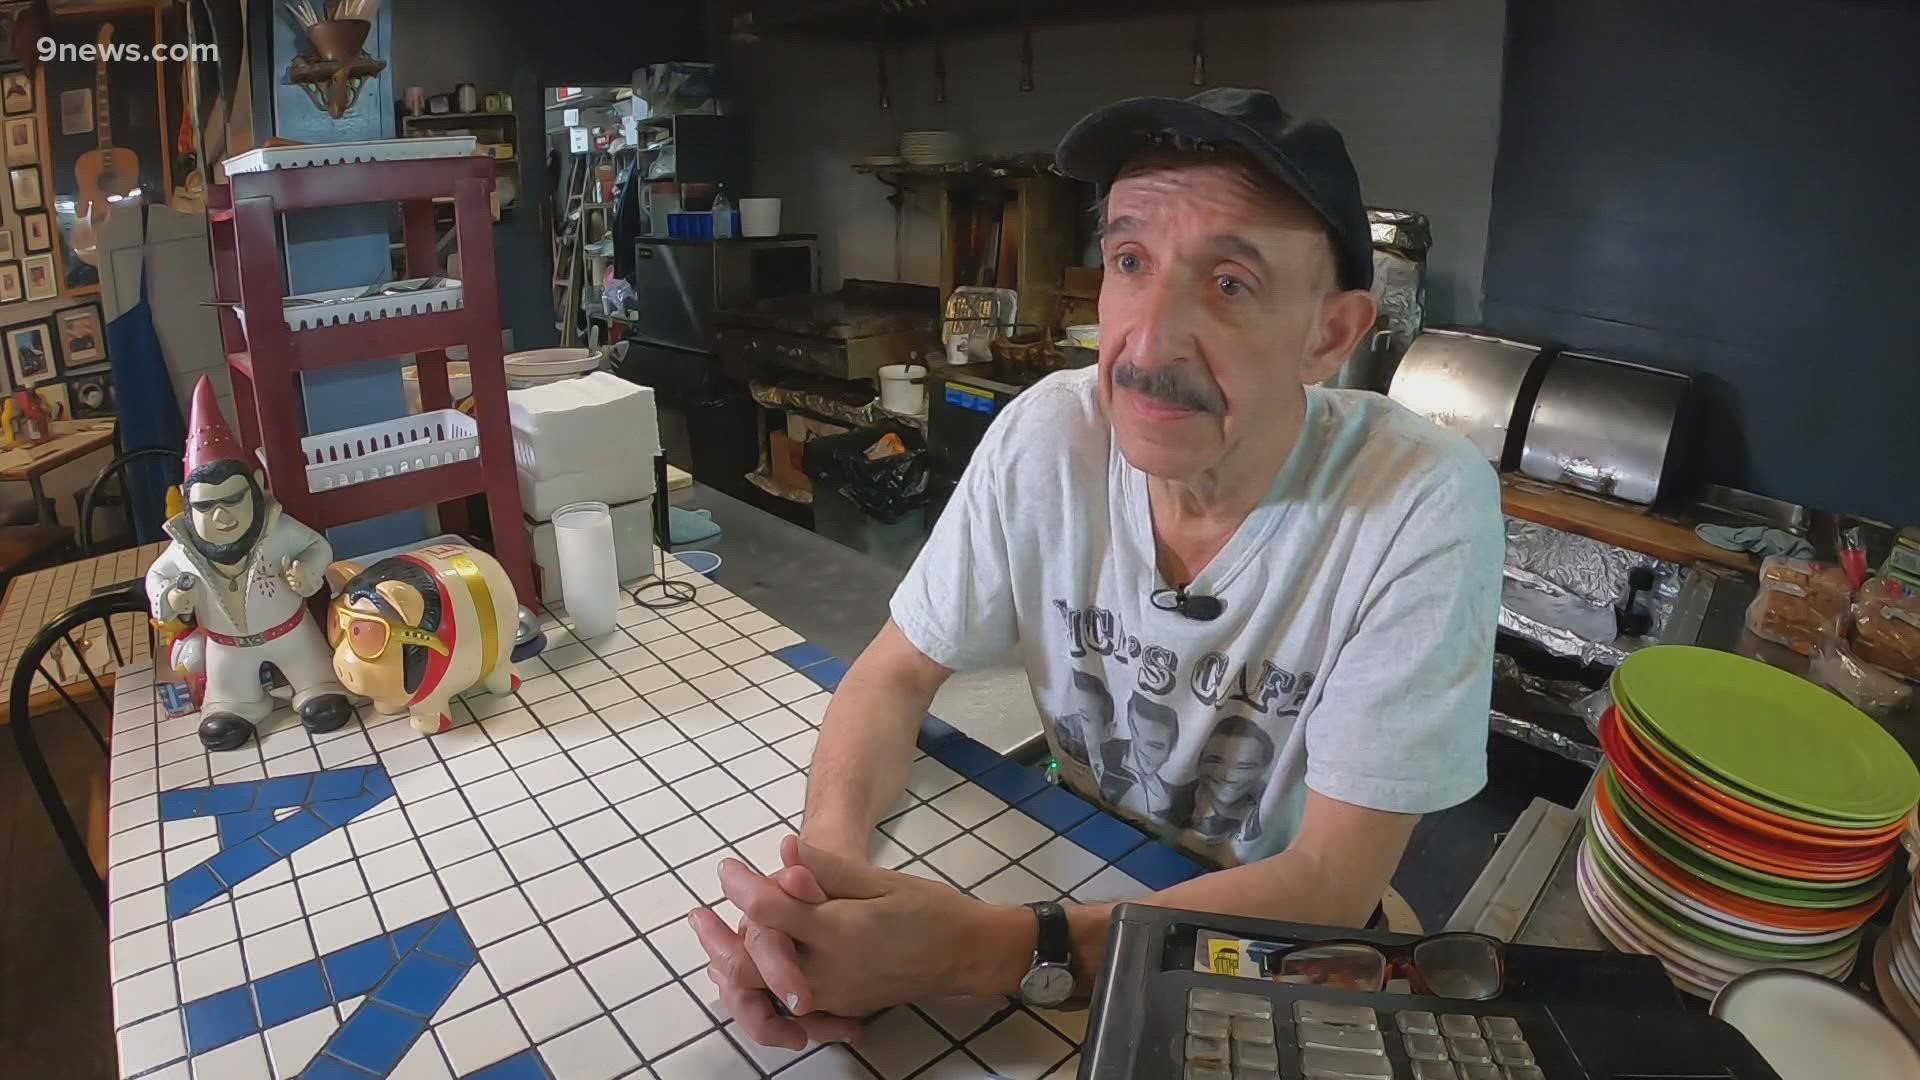 Nick's Cafe is closing after serving the public for more than 30 years on Simms Street in Lakewood.